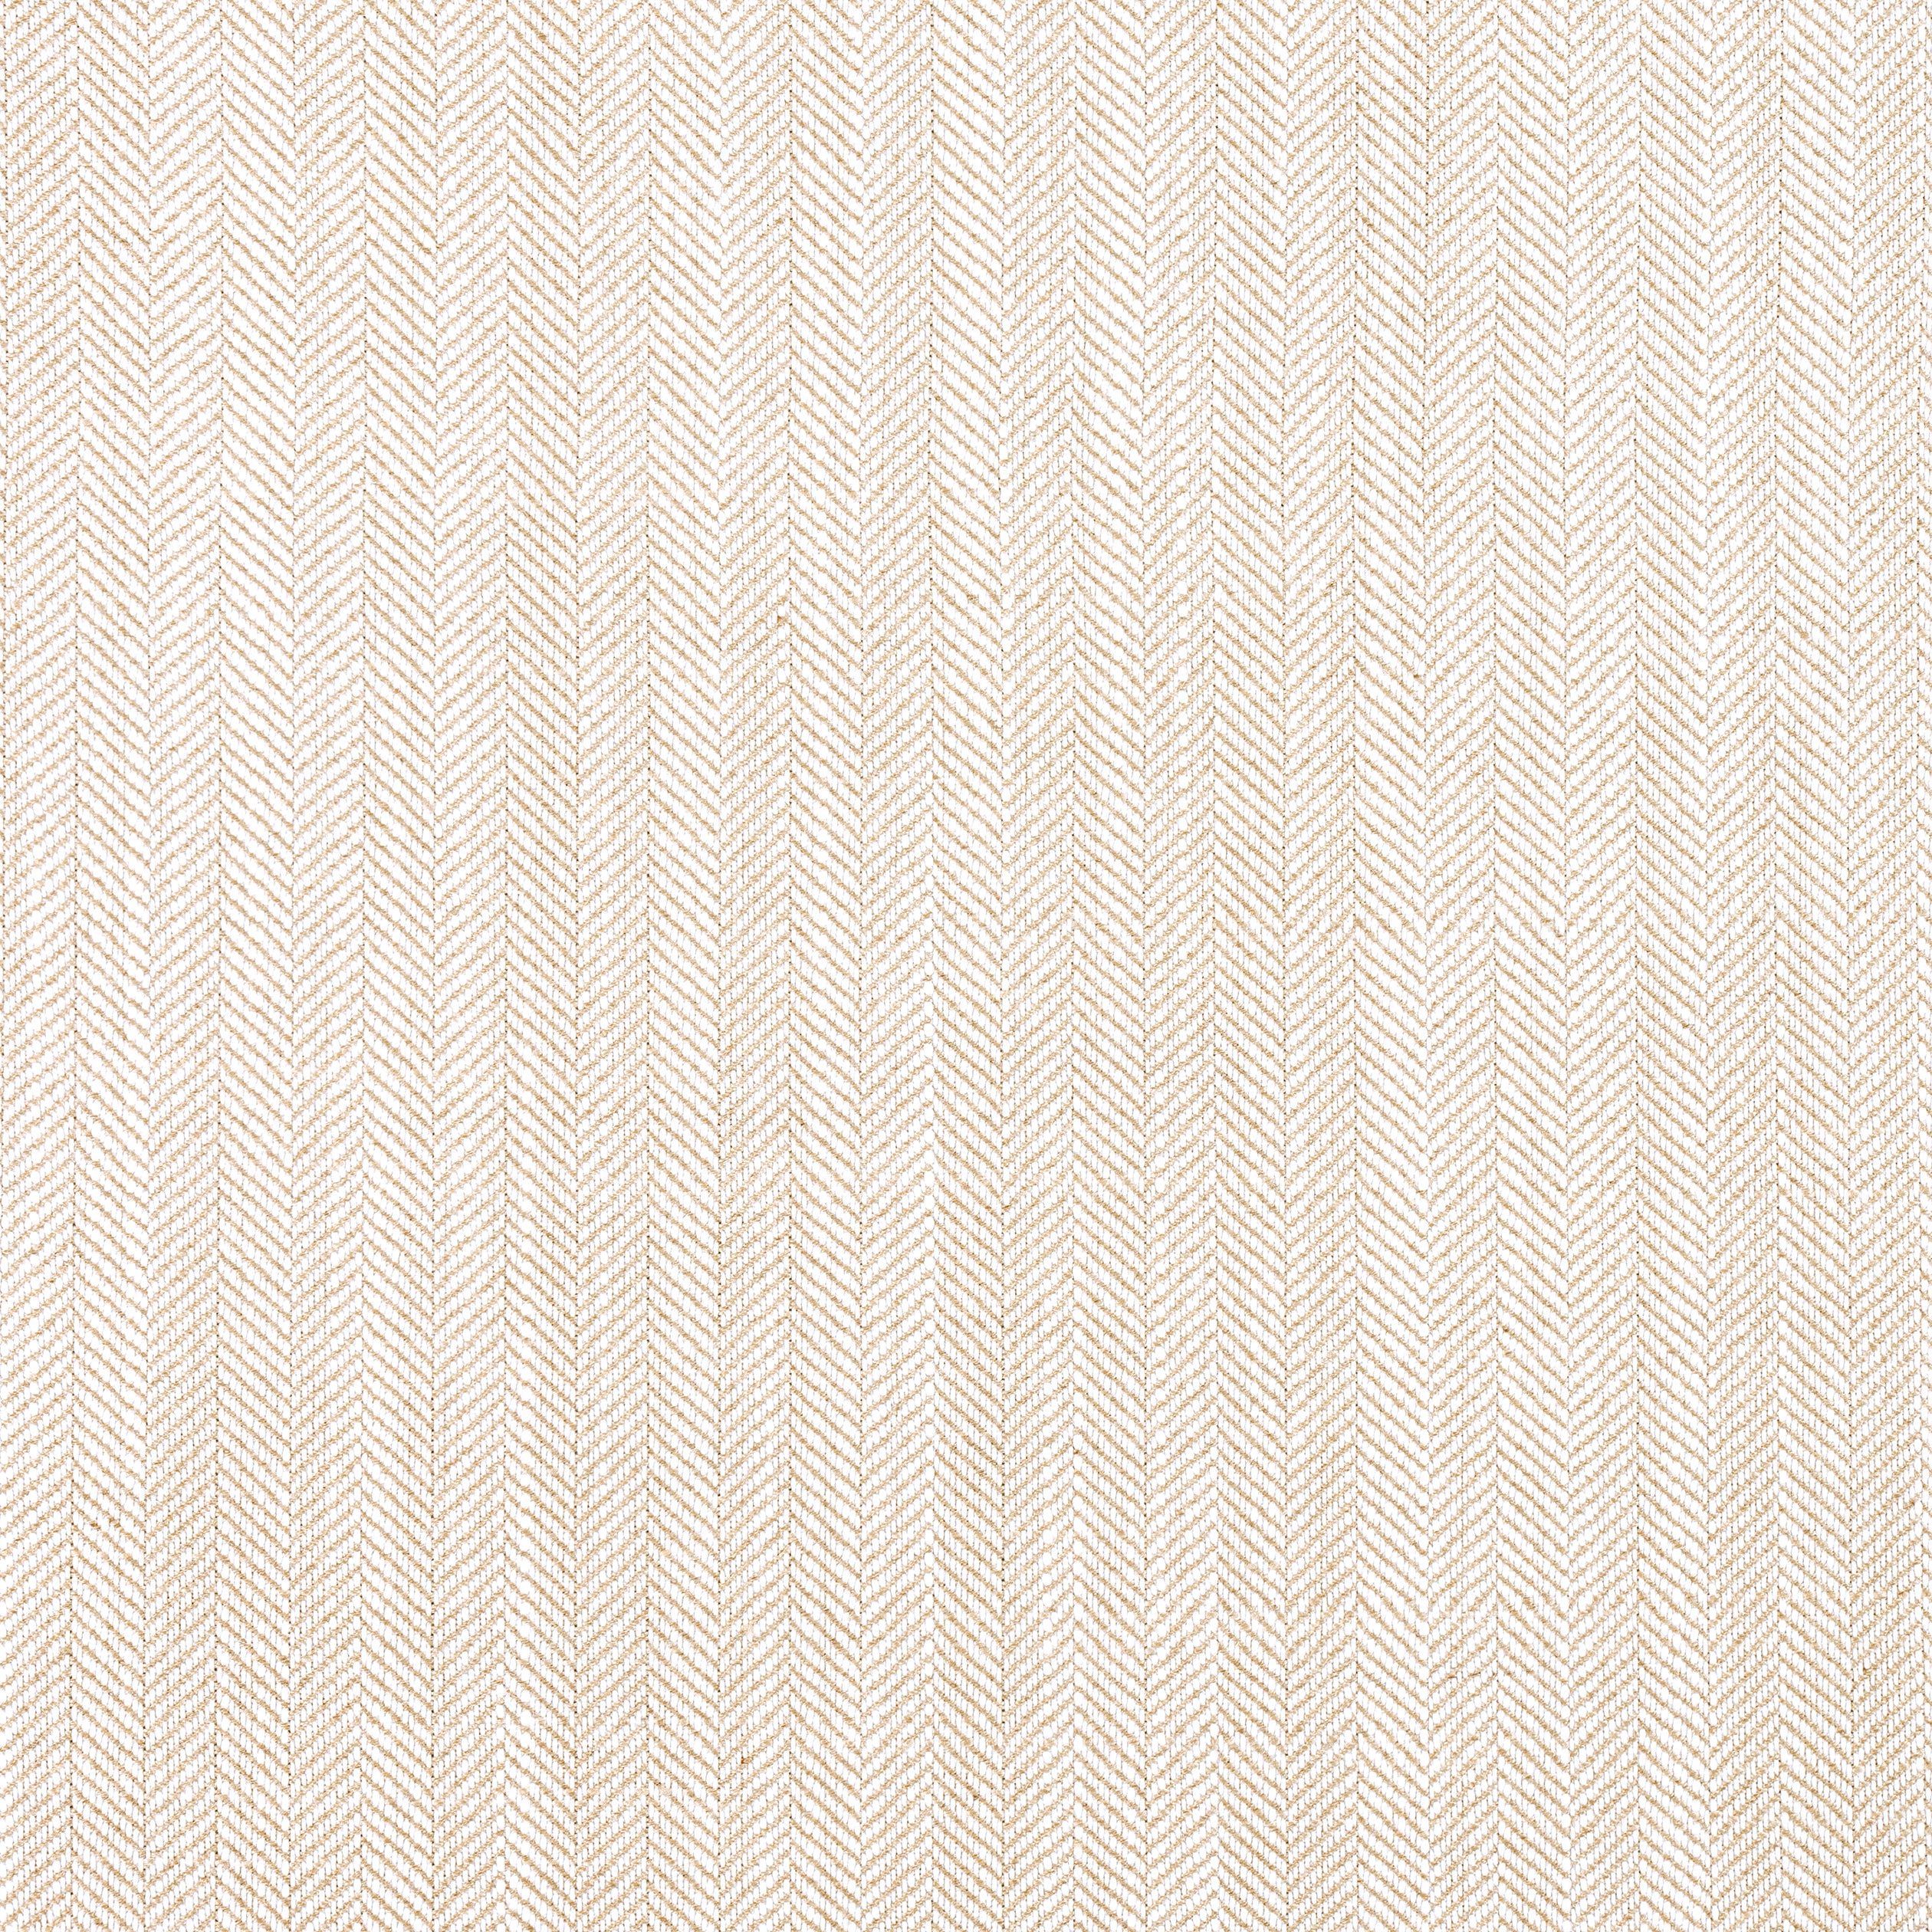 Savile fabric in sand color - pattern number W8559 - by Thibaut in the Villa Textures collection